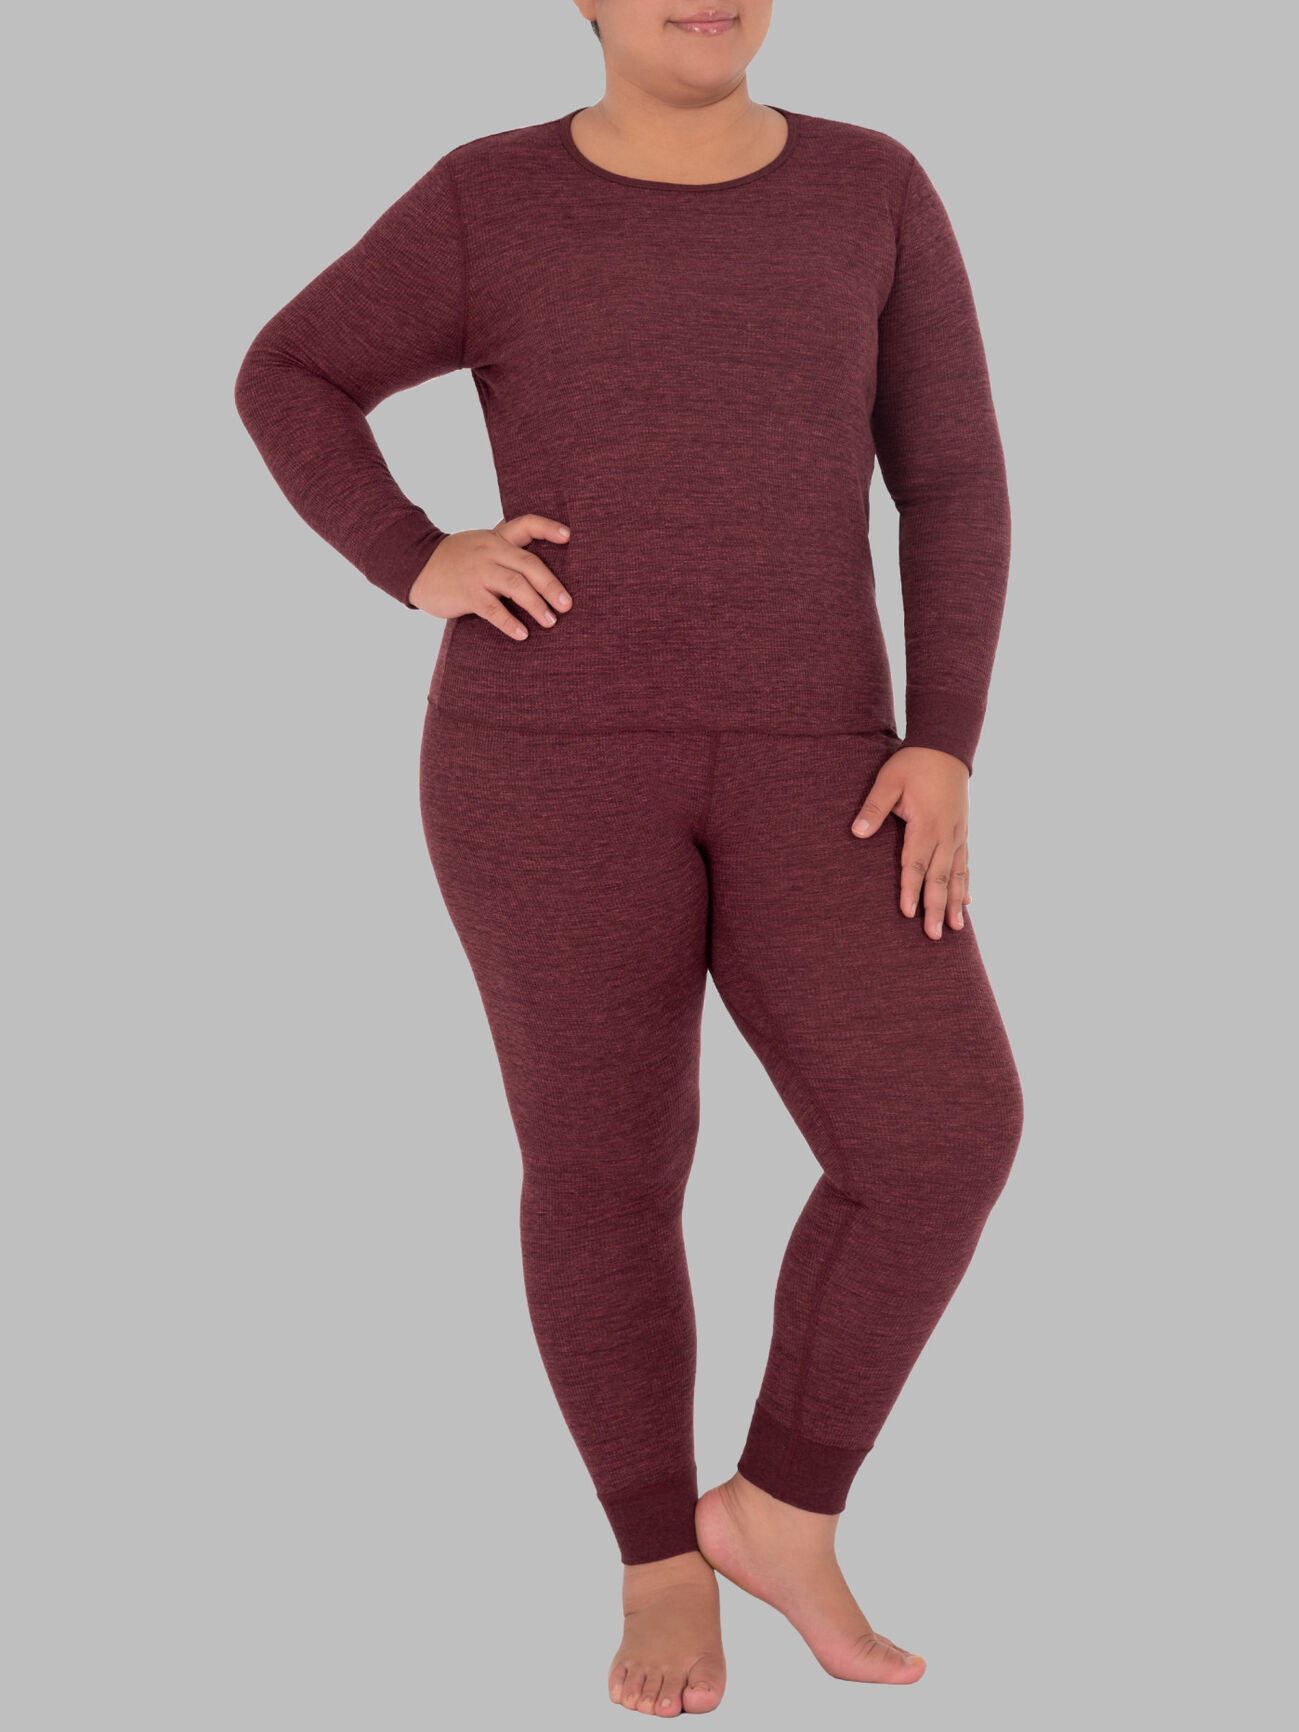 Fruit of the Loom Women's and Women's Plus Long Underwear Thermal Waffle  Top and Bottom Set 